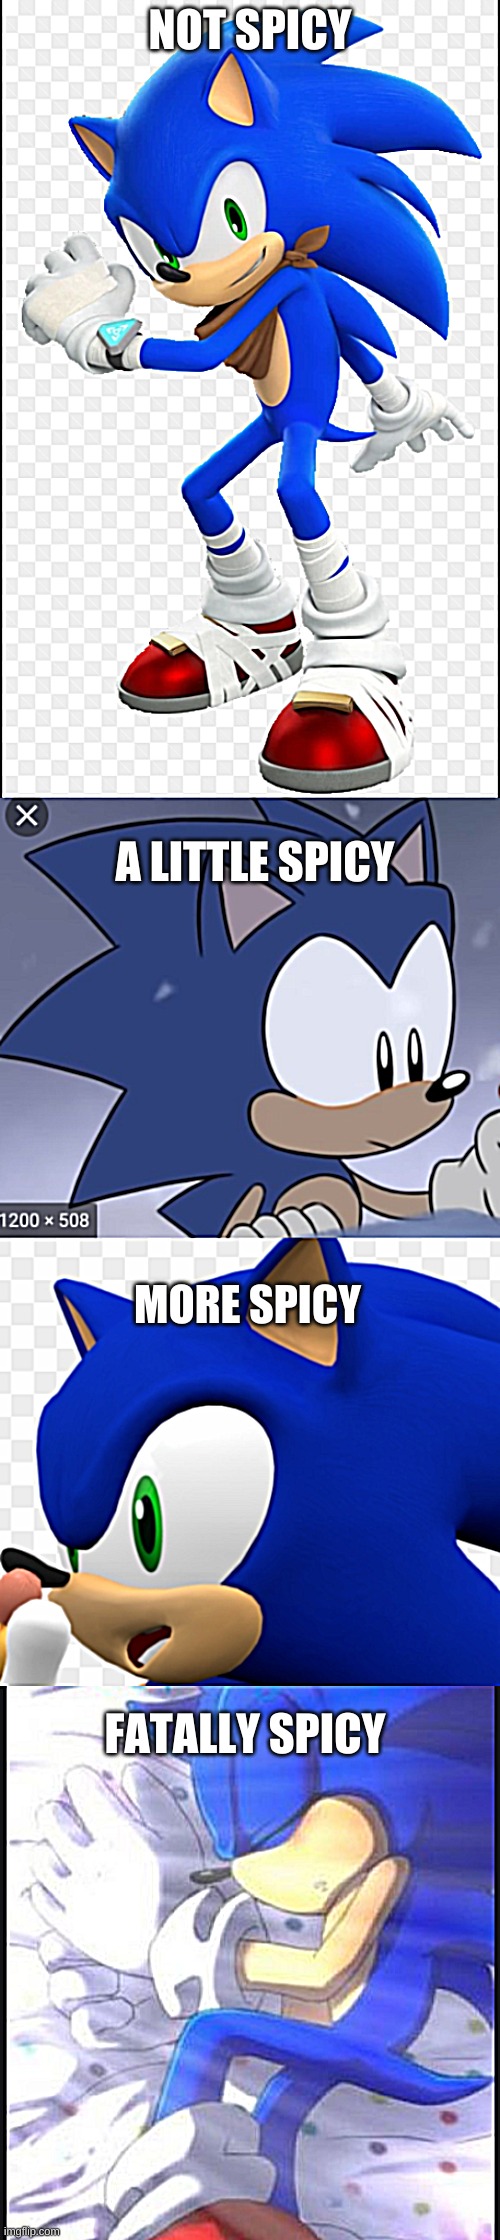 NOT SPICY; A LITTLE SPICY; MORE SPICY; FATALLY SPICY | made w/ Imgflip meme maker